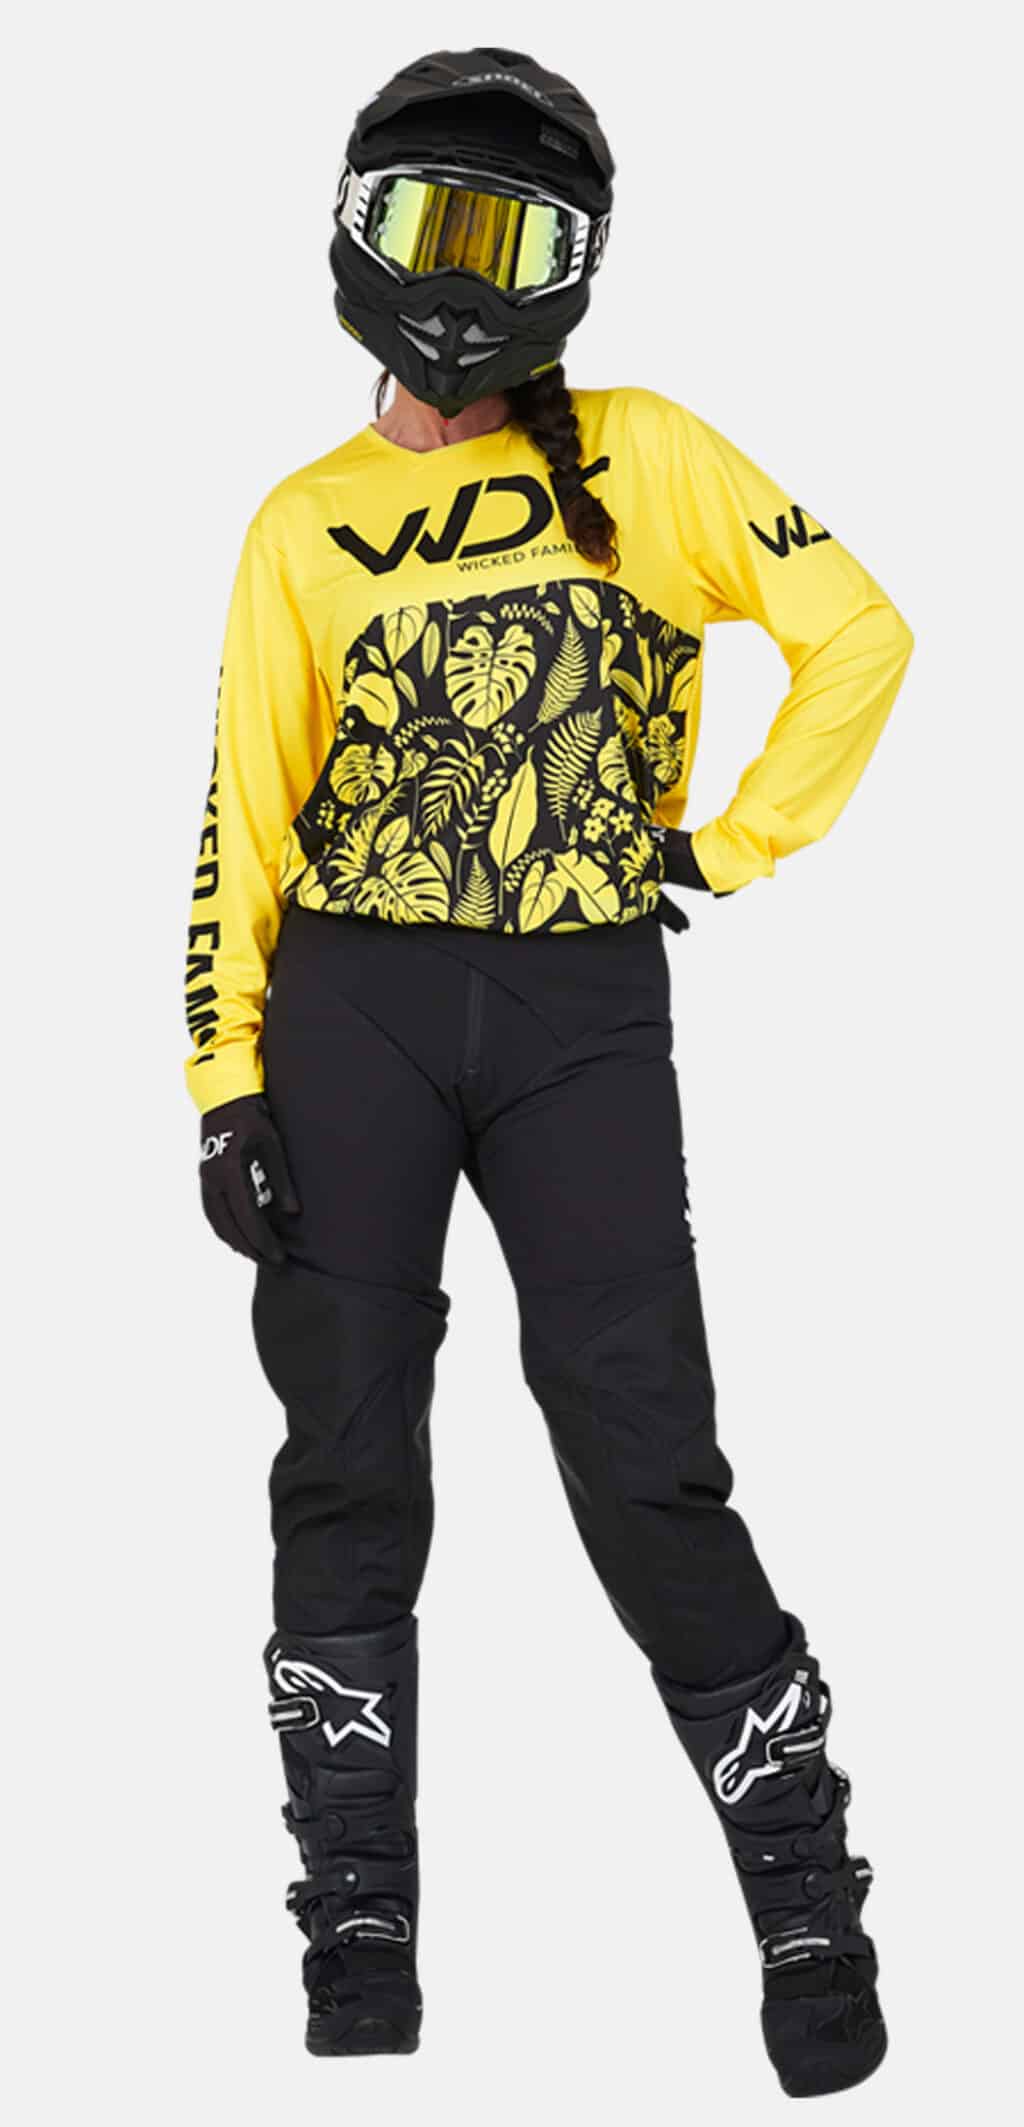 Action womens MX gear set in yellow on woman